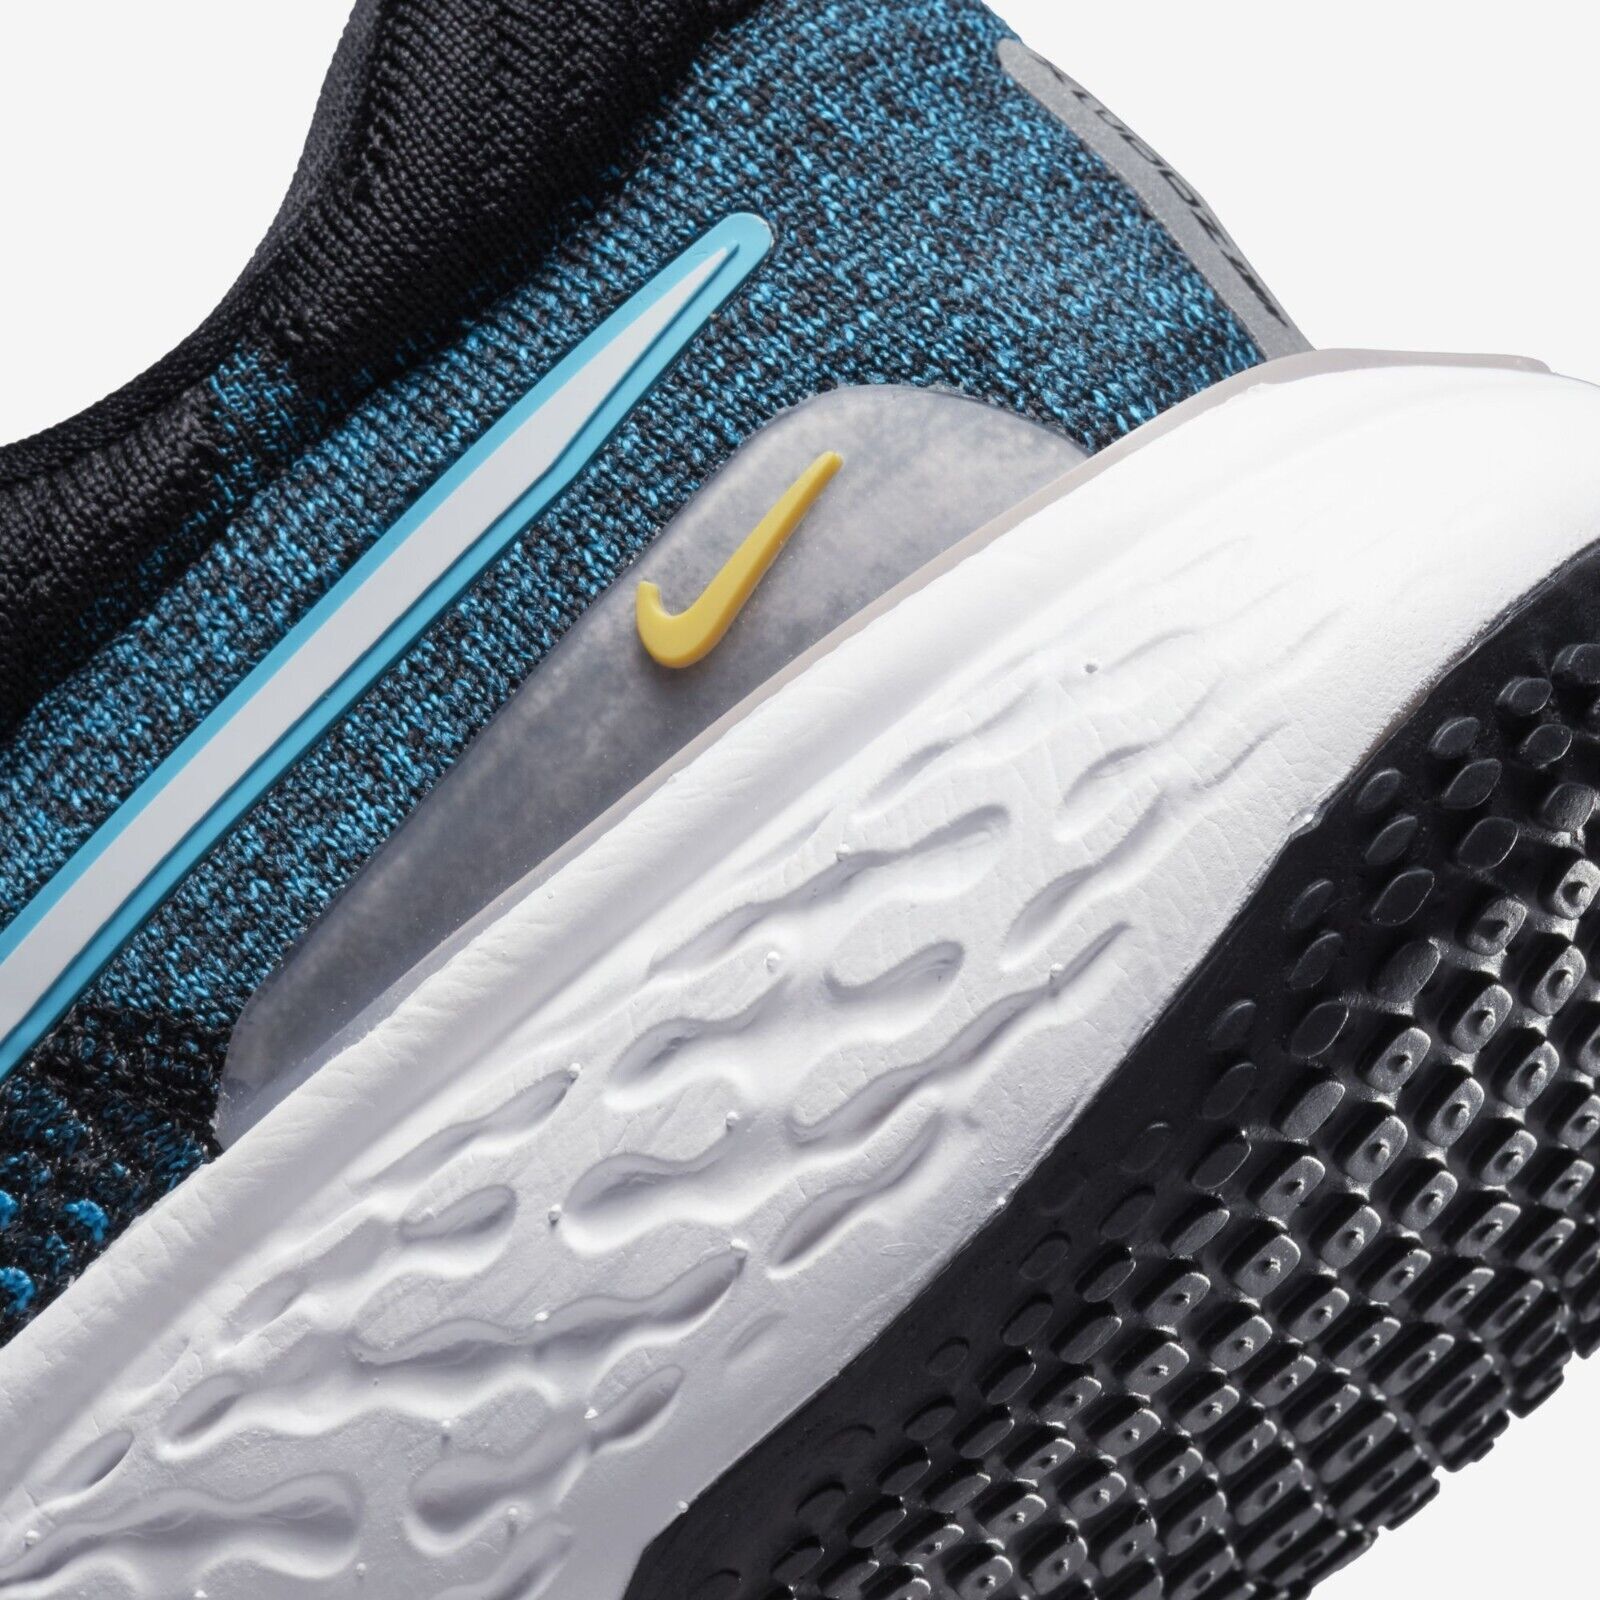 GIÀY THỂ THAO NIKE NAM ZOOMX INVINCIBLE RUN FLYKNIT 2 BLACK CHLORINE BLUE WHITE DH5425-003 8